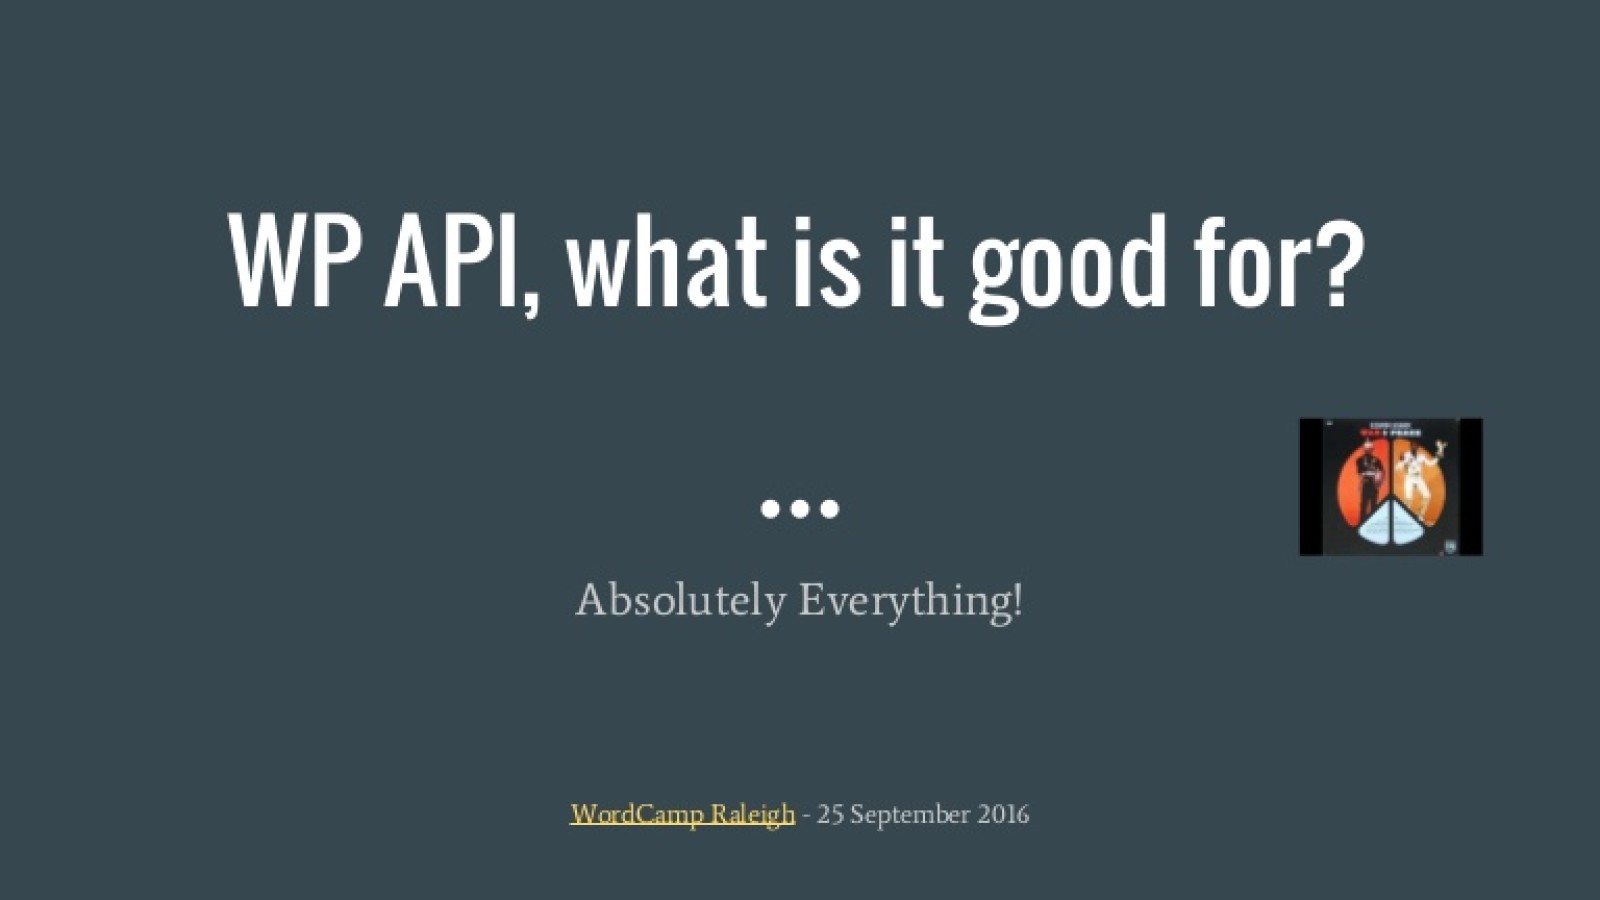 WP API, What is it Good For? Absolutely Everything!